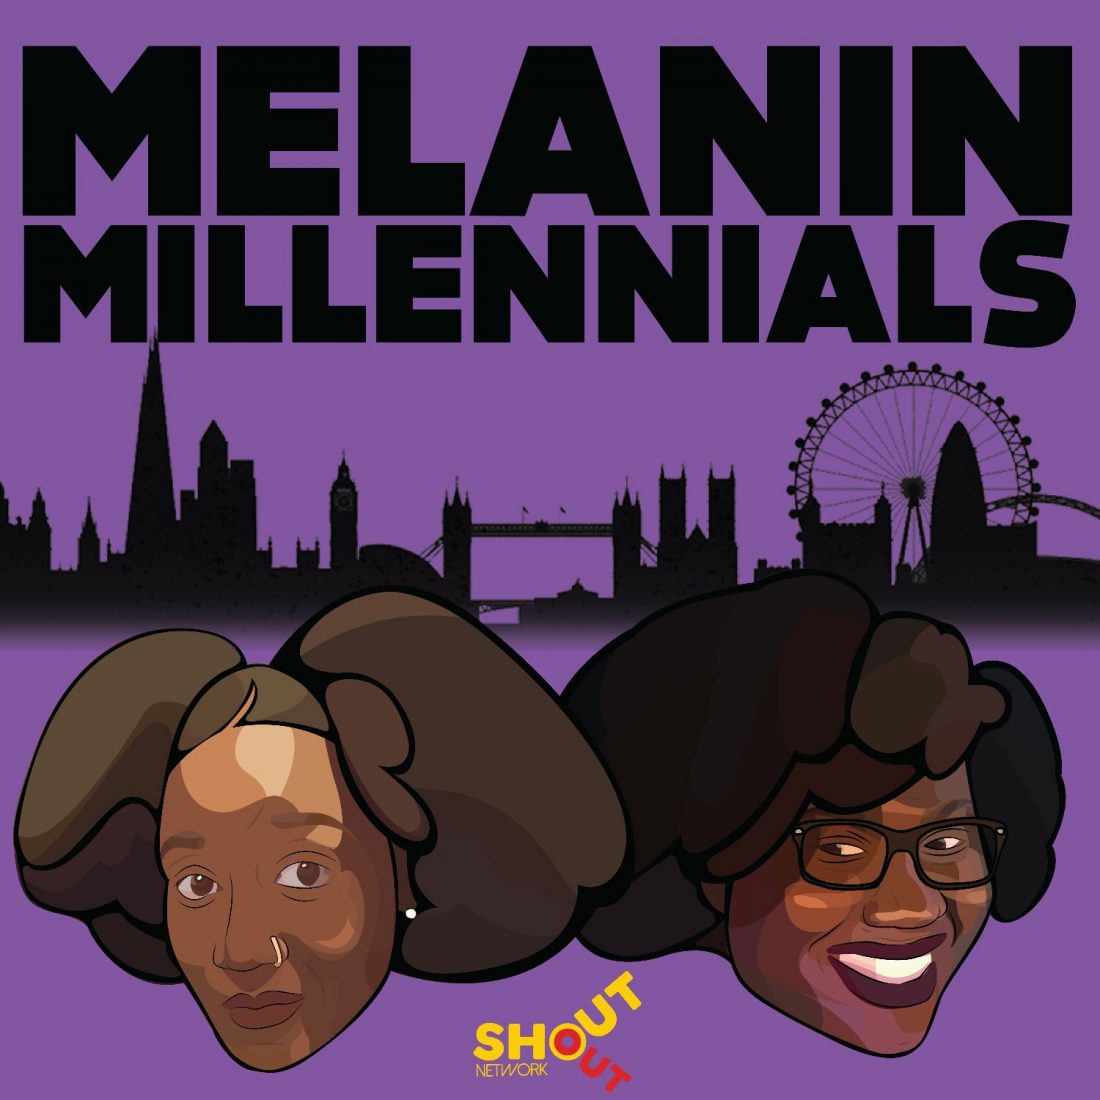 Melan Mag - Melanin Millennials and 12 other favourite podcasts